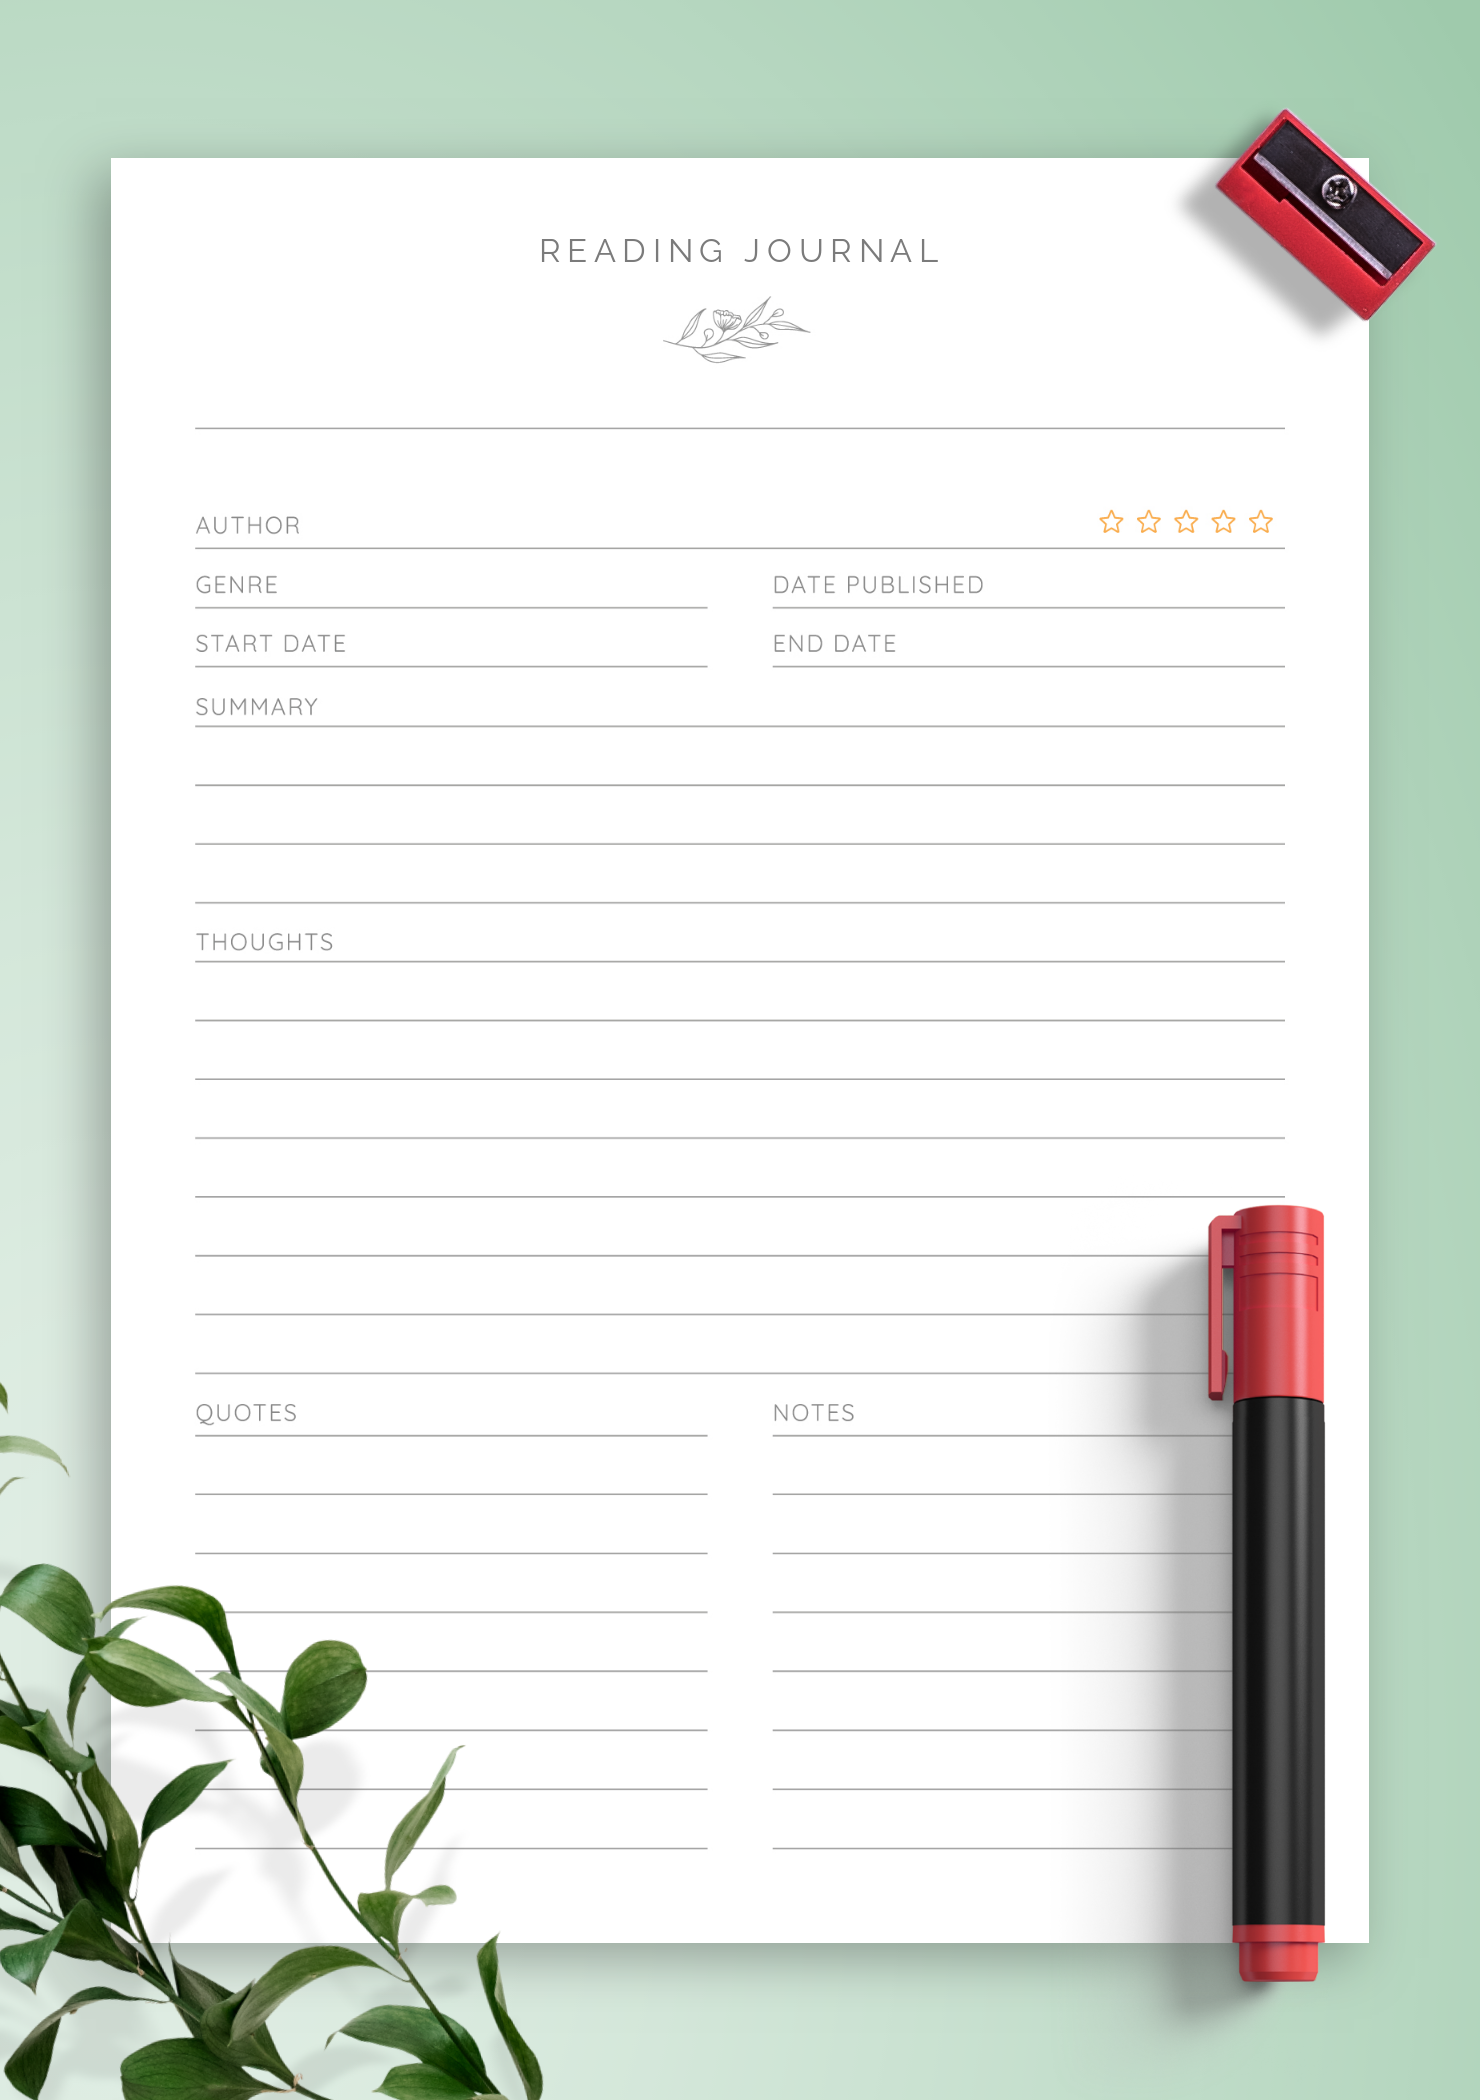 Reading Journal Template Free Download